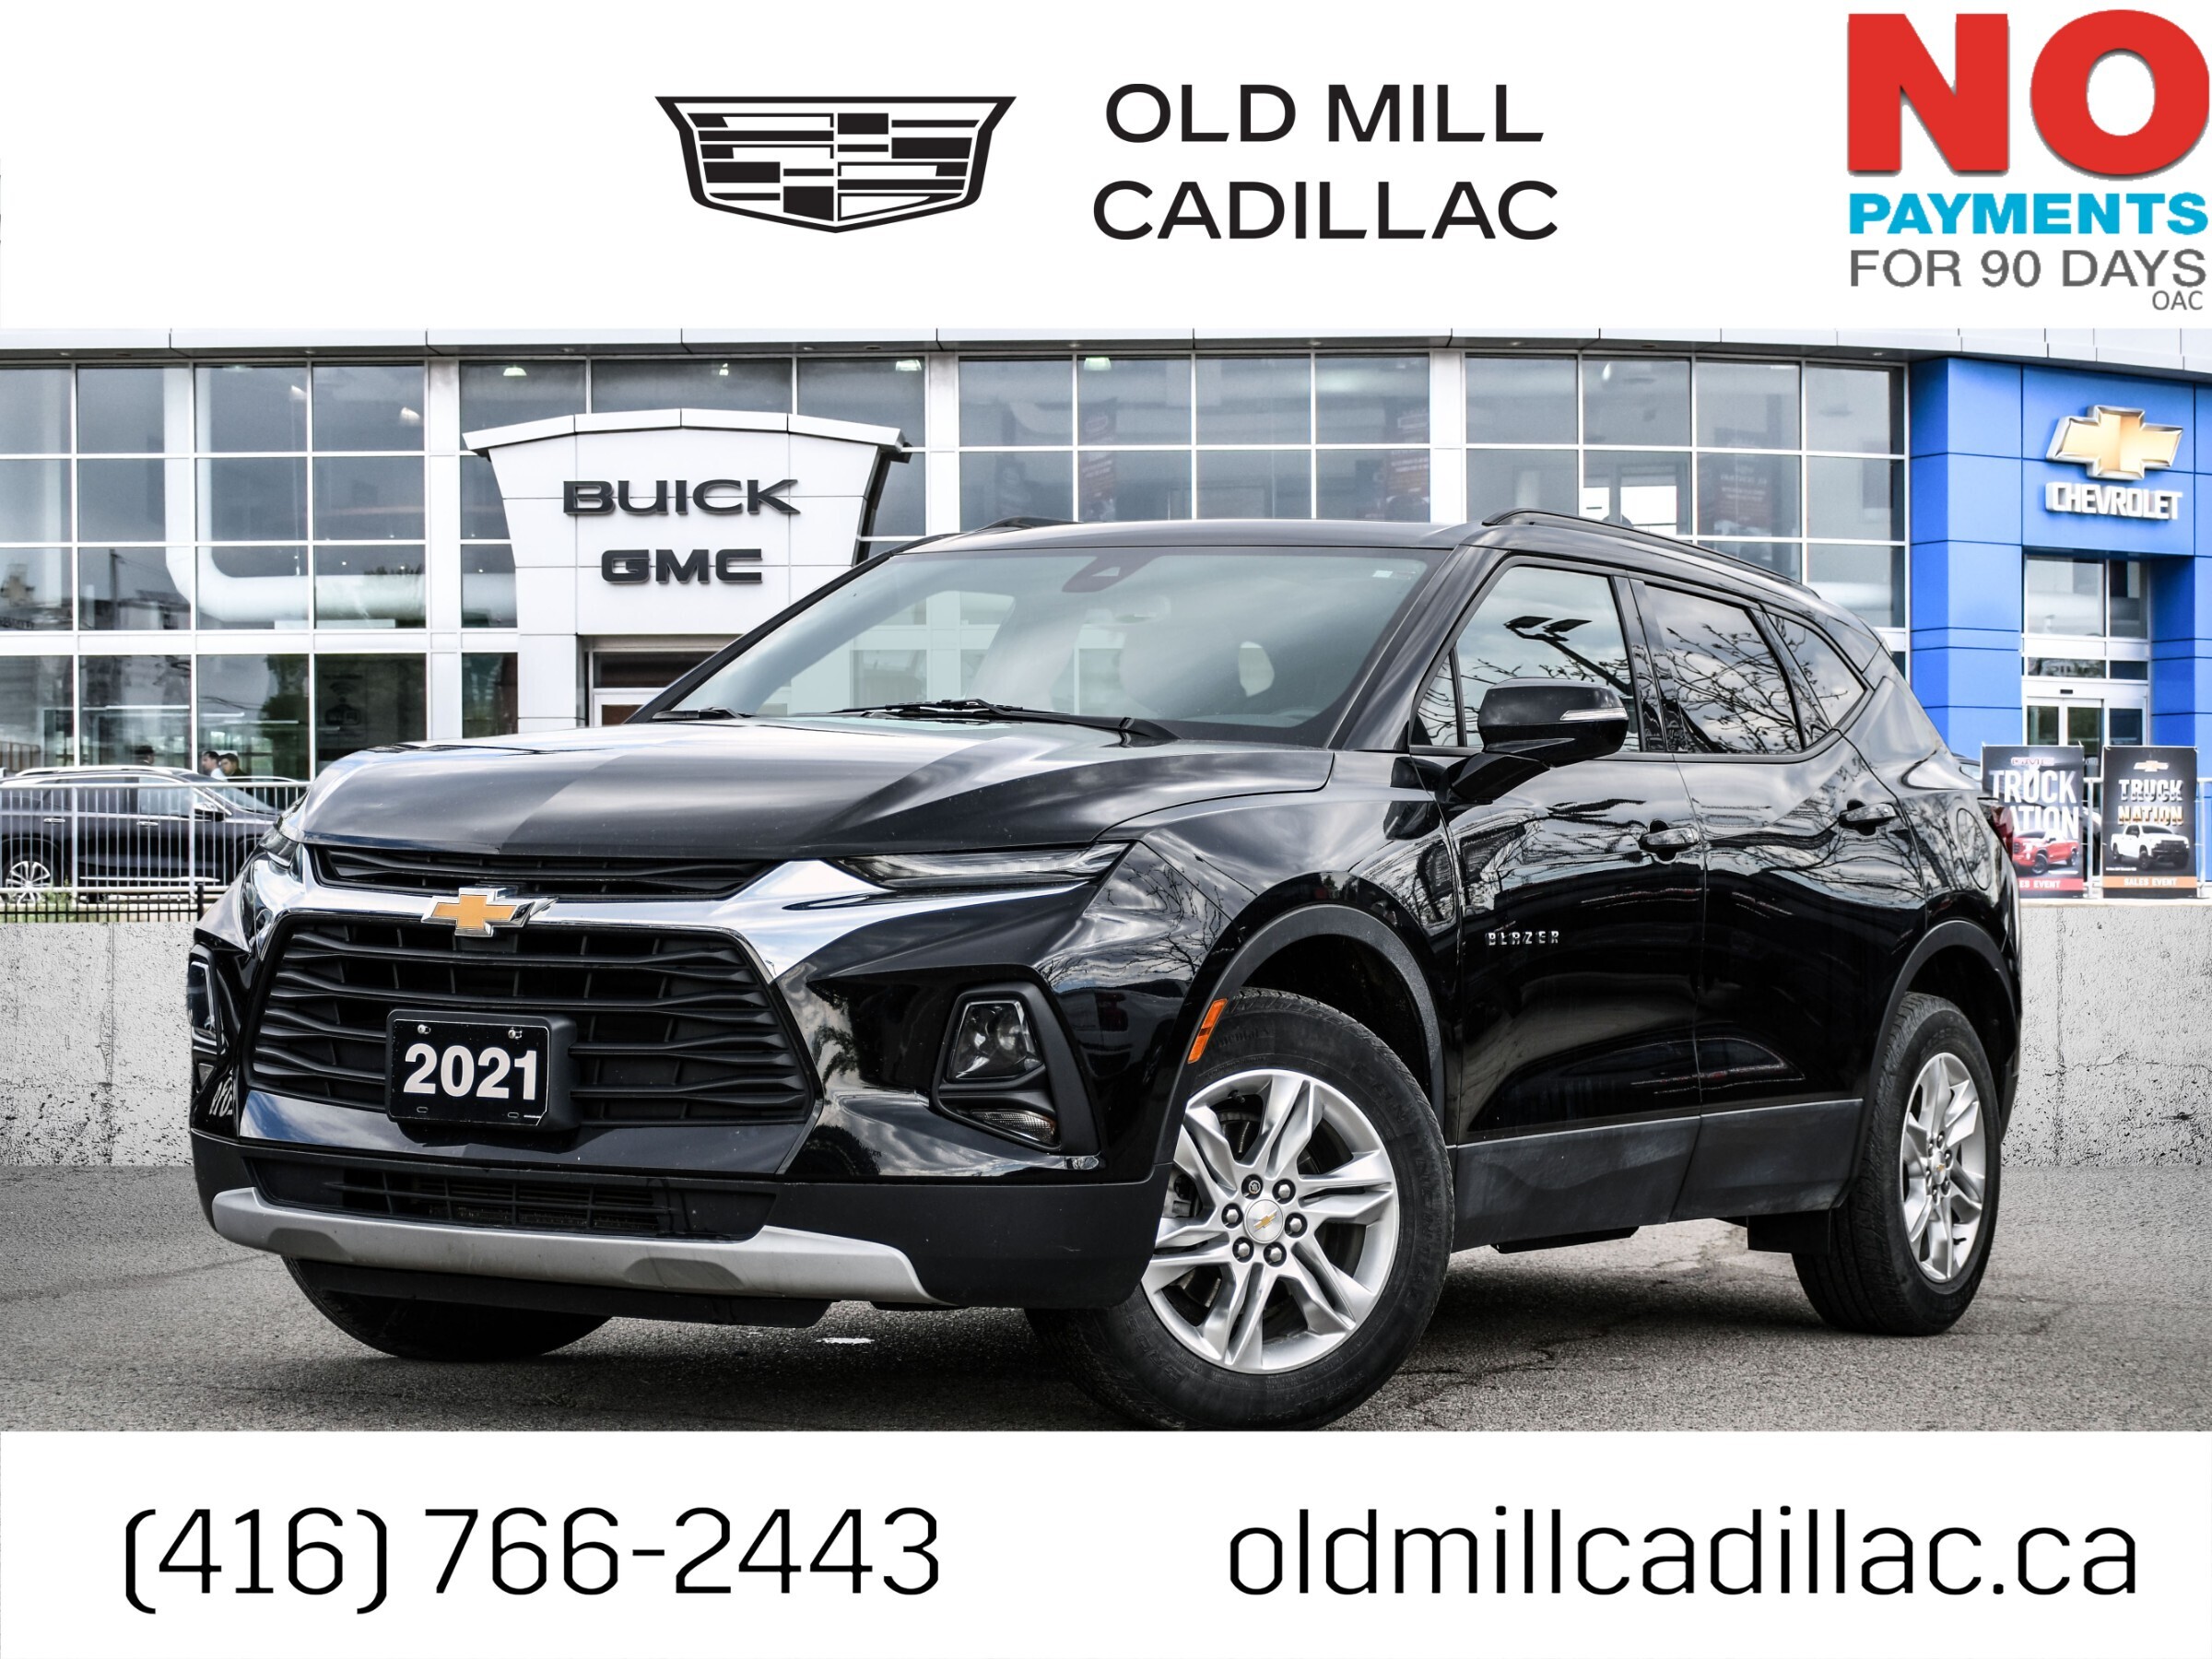 2021 Chevrolet Blazer CLEAN CARFAX | LEATHER | PANO ROOF | POWER TRUNK